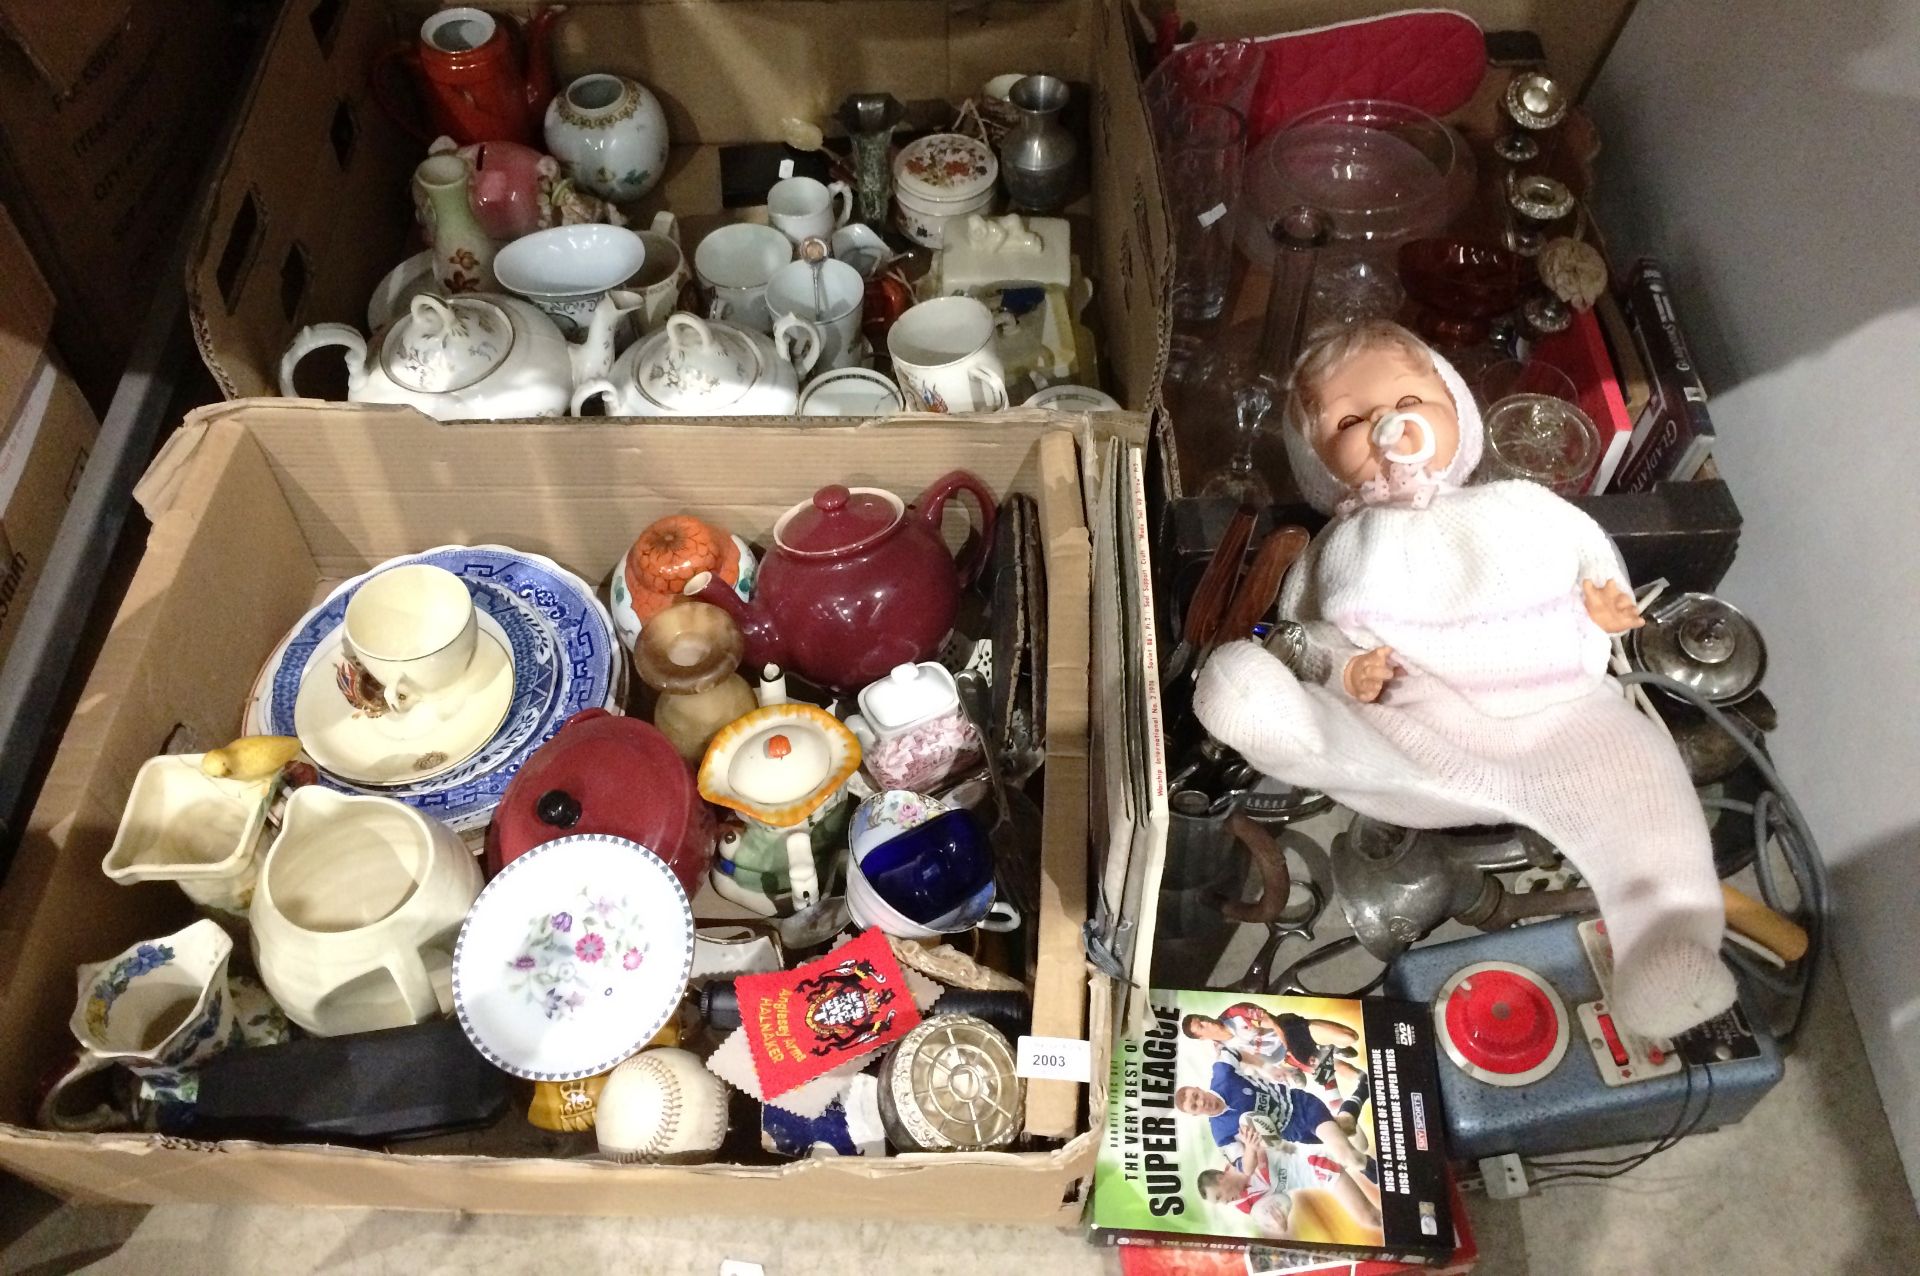 Contents to under part of rack four boxes of assorted pottery/porcelain, glassware, doll,